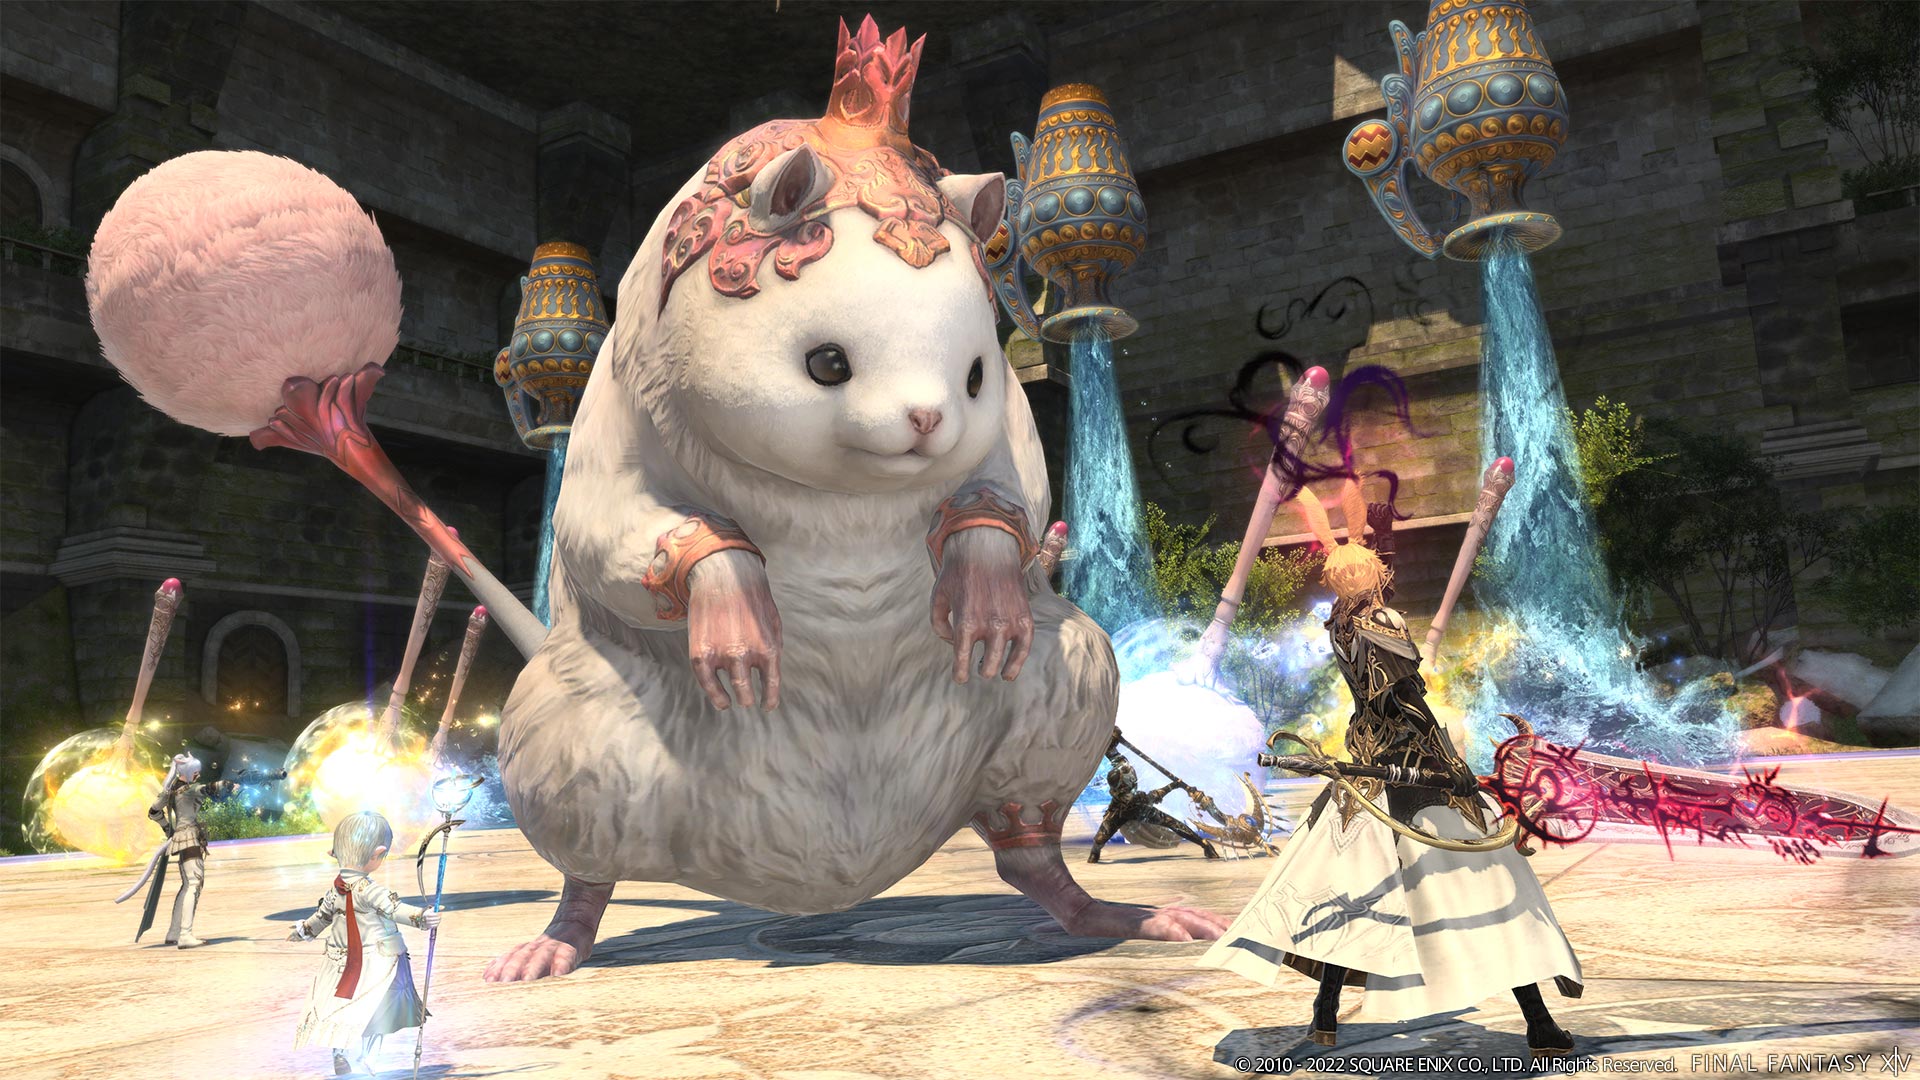 Midnight Sun - The Glamour Dresser : Final Fantasy XIV Mods and More